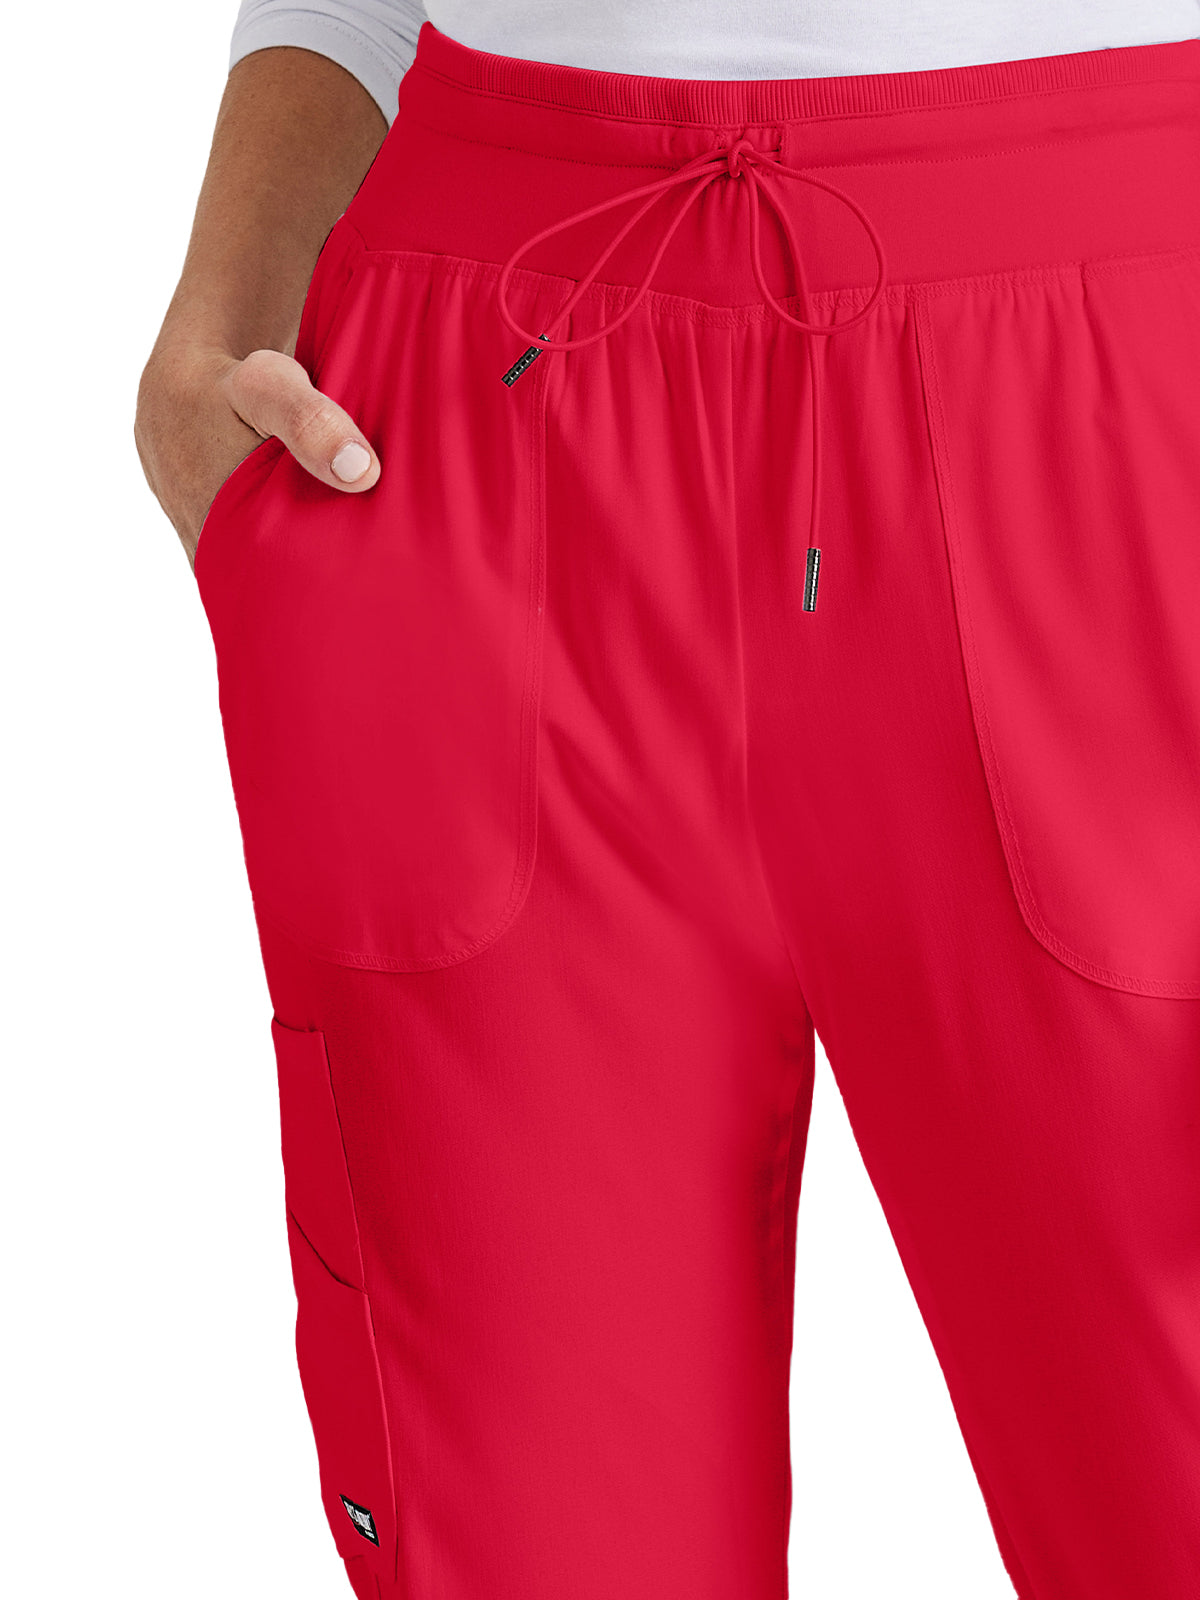 Women's 7-Pocket Carly Jogger Scrub Pant - GRSP527 - Scarlet Red